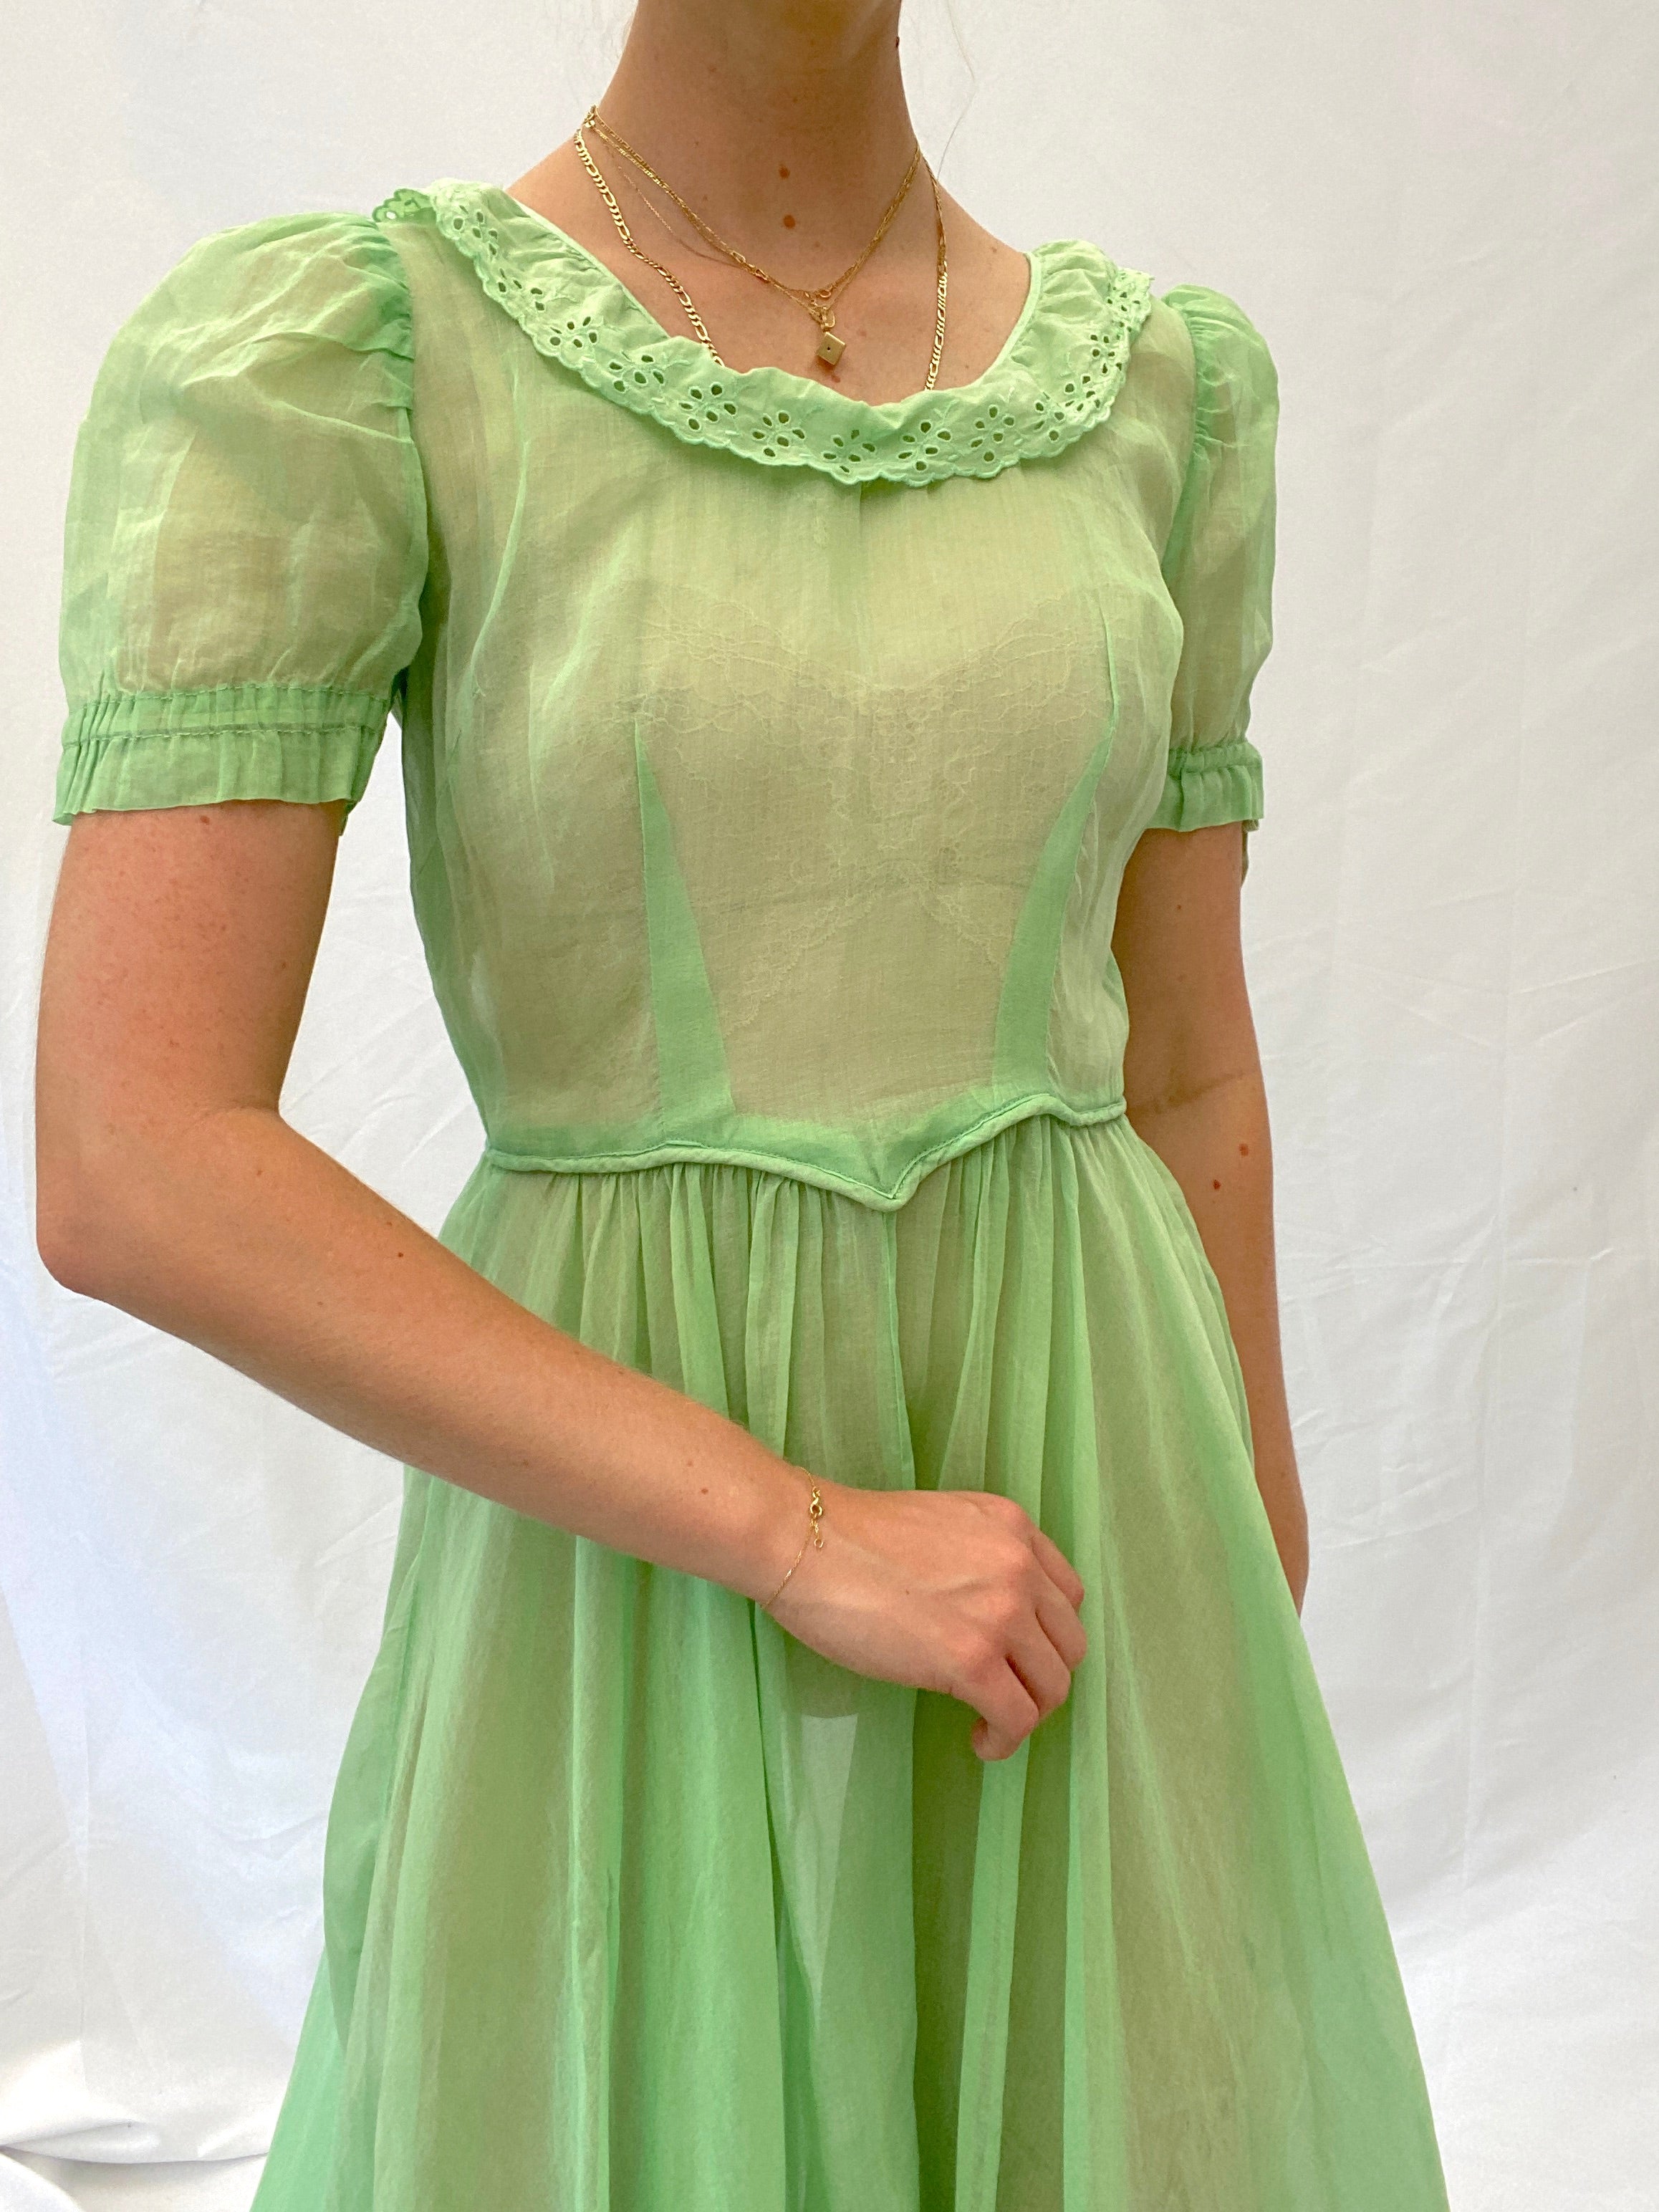 1930's Hand Dyed Green Puffed Sleeve Gown with Floral Eyelet Ruffle